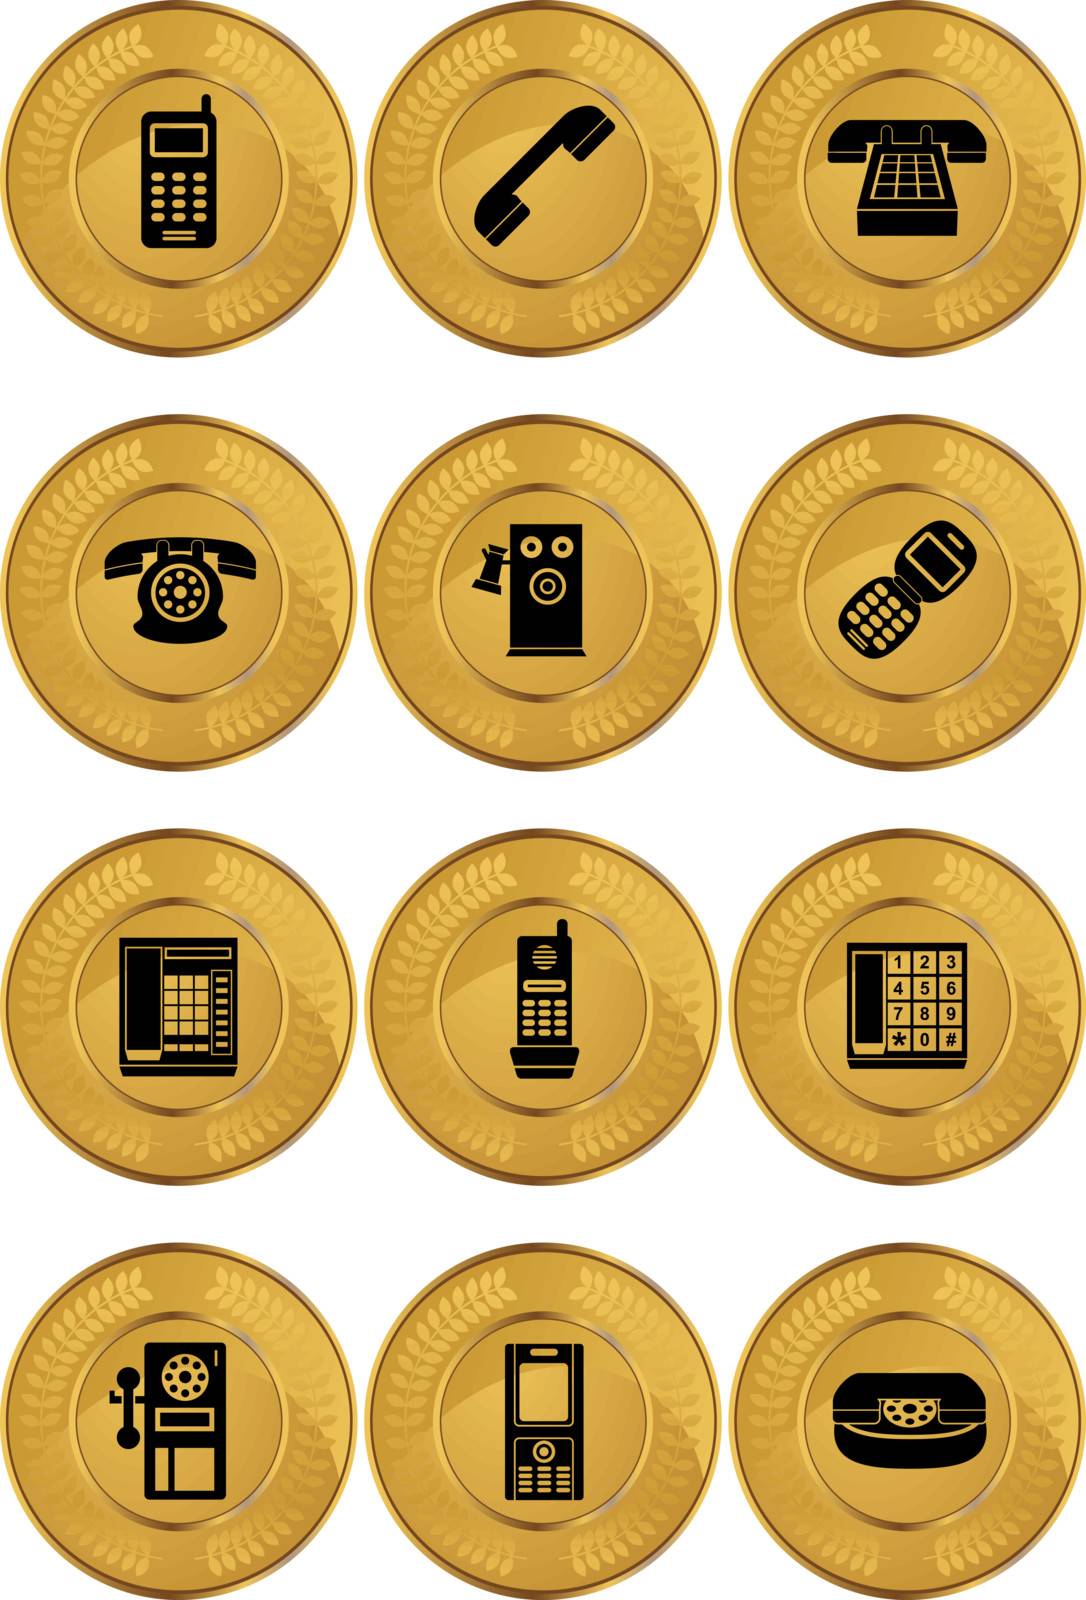 An image of a phone icon set.